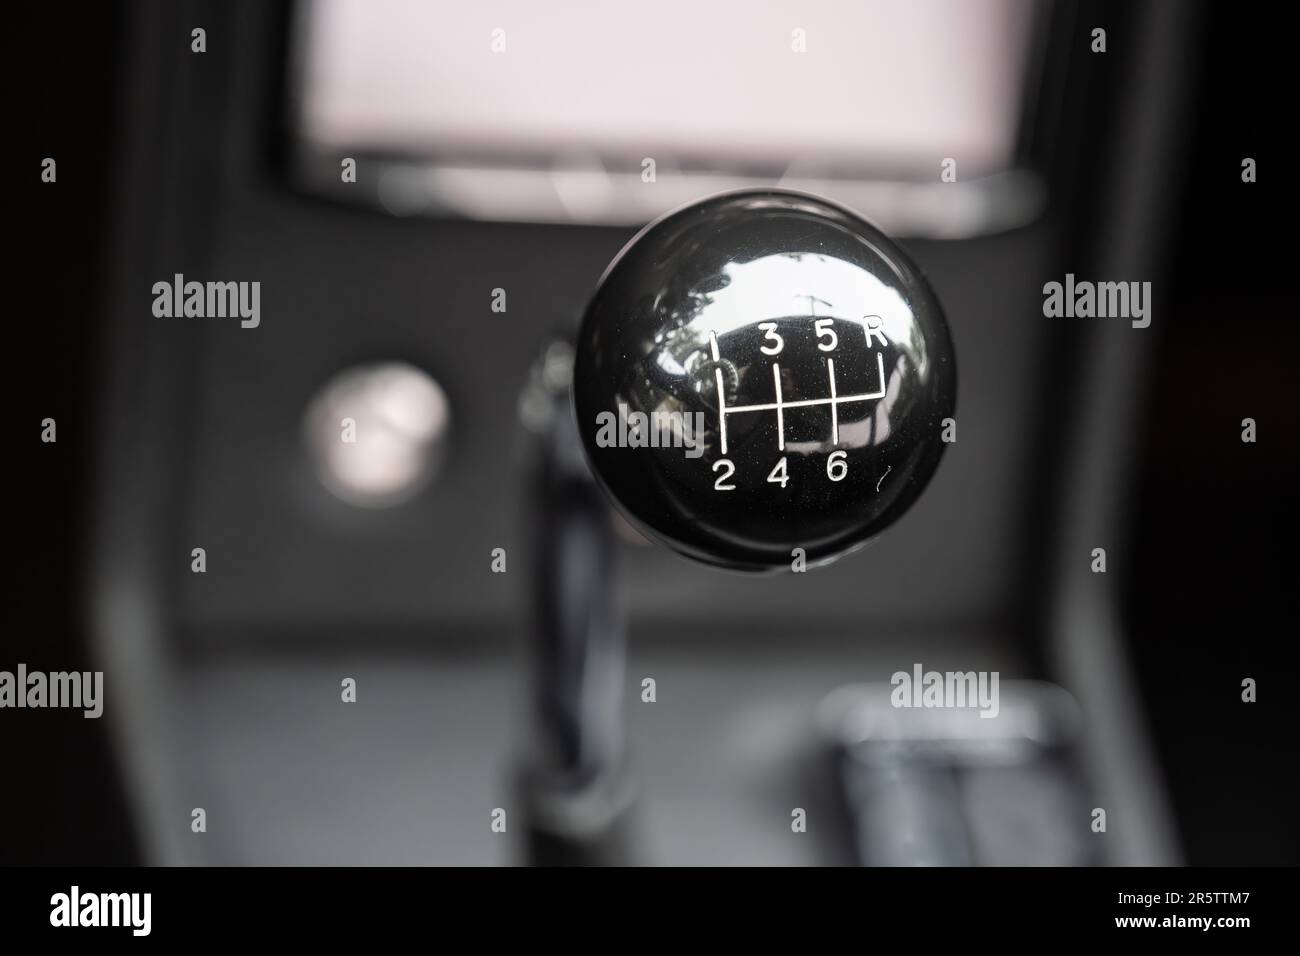 6-speed stick shifter shows all the positions for each gear of the manual transmission. Stock Photo